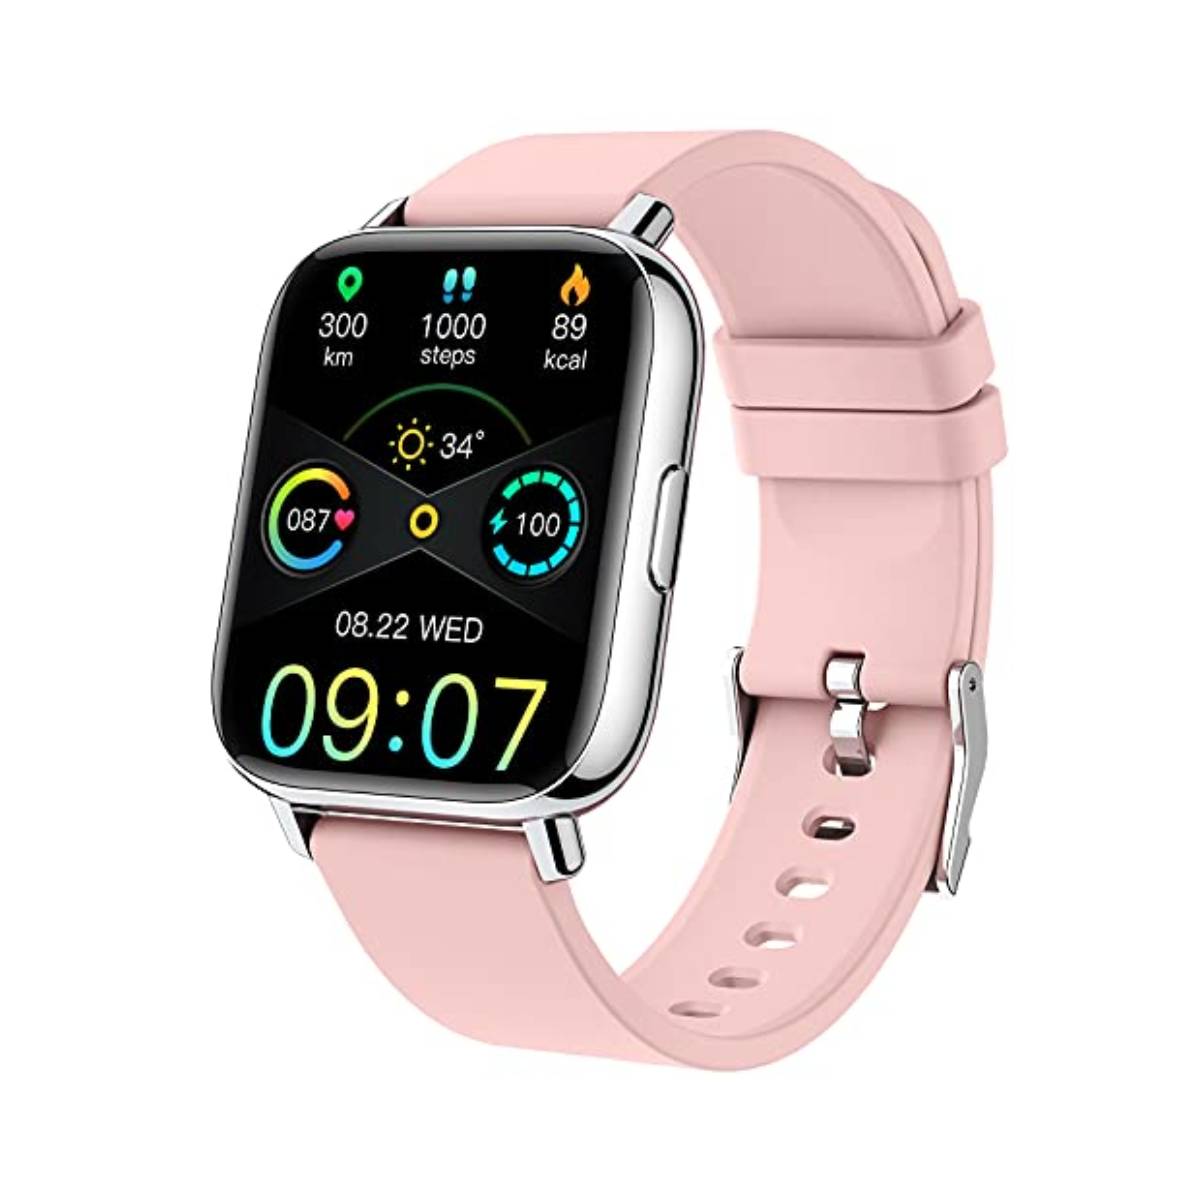 Smart Watch 2021 for Women, Fitness Tracker 1.69" Touch Screen Smartwatch Fitness Watch IP68 Waterproof 24 Sports, Heart Rate Monitor/Pedometer/Sleep Monitor, Activity Tracker for Android iPhone, Pink